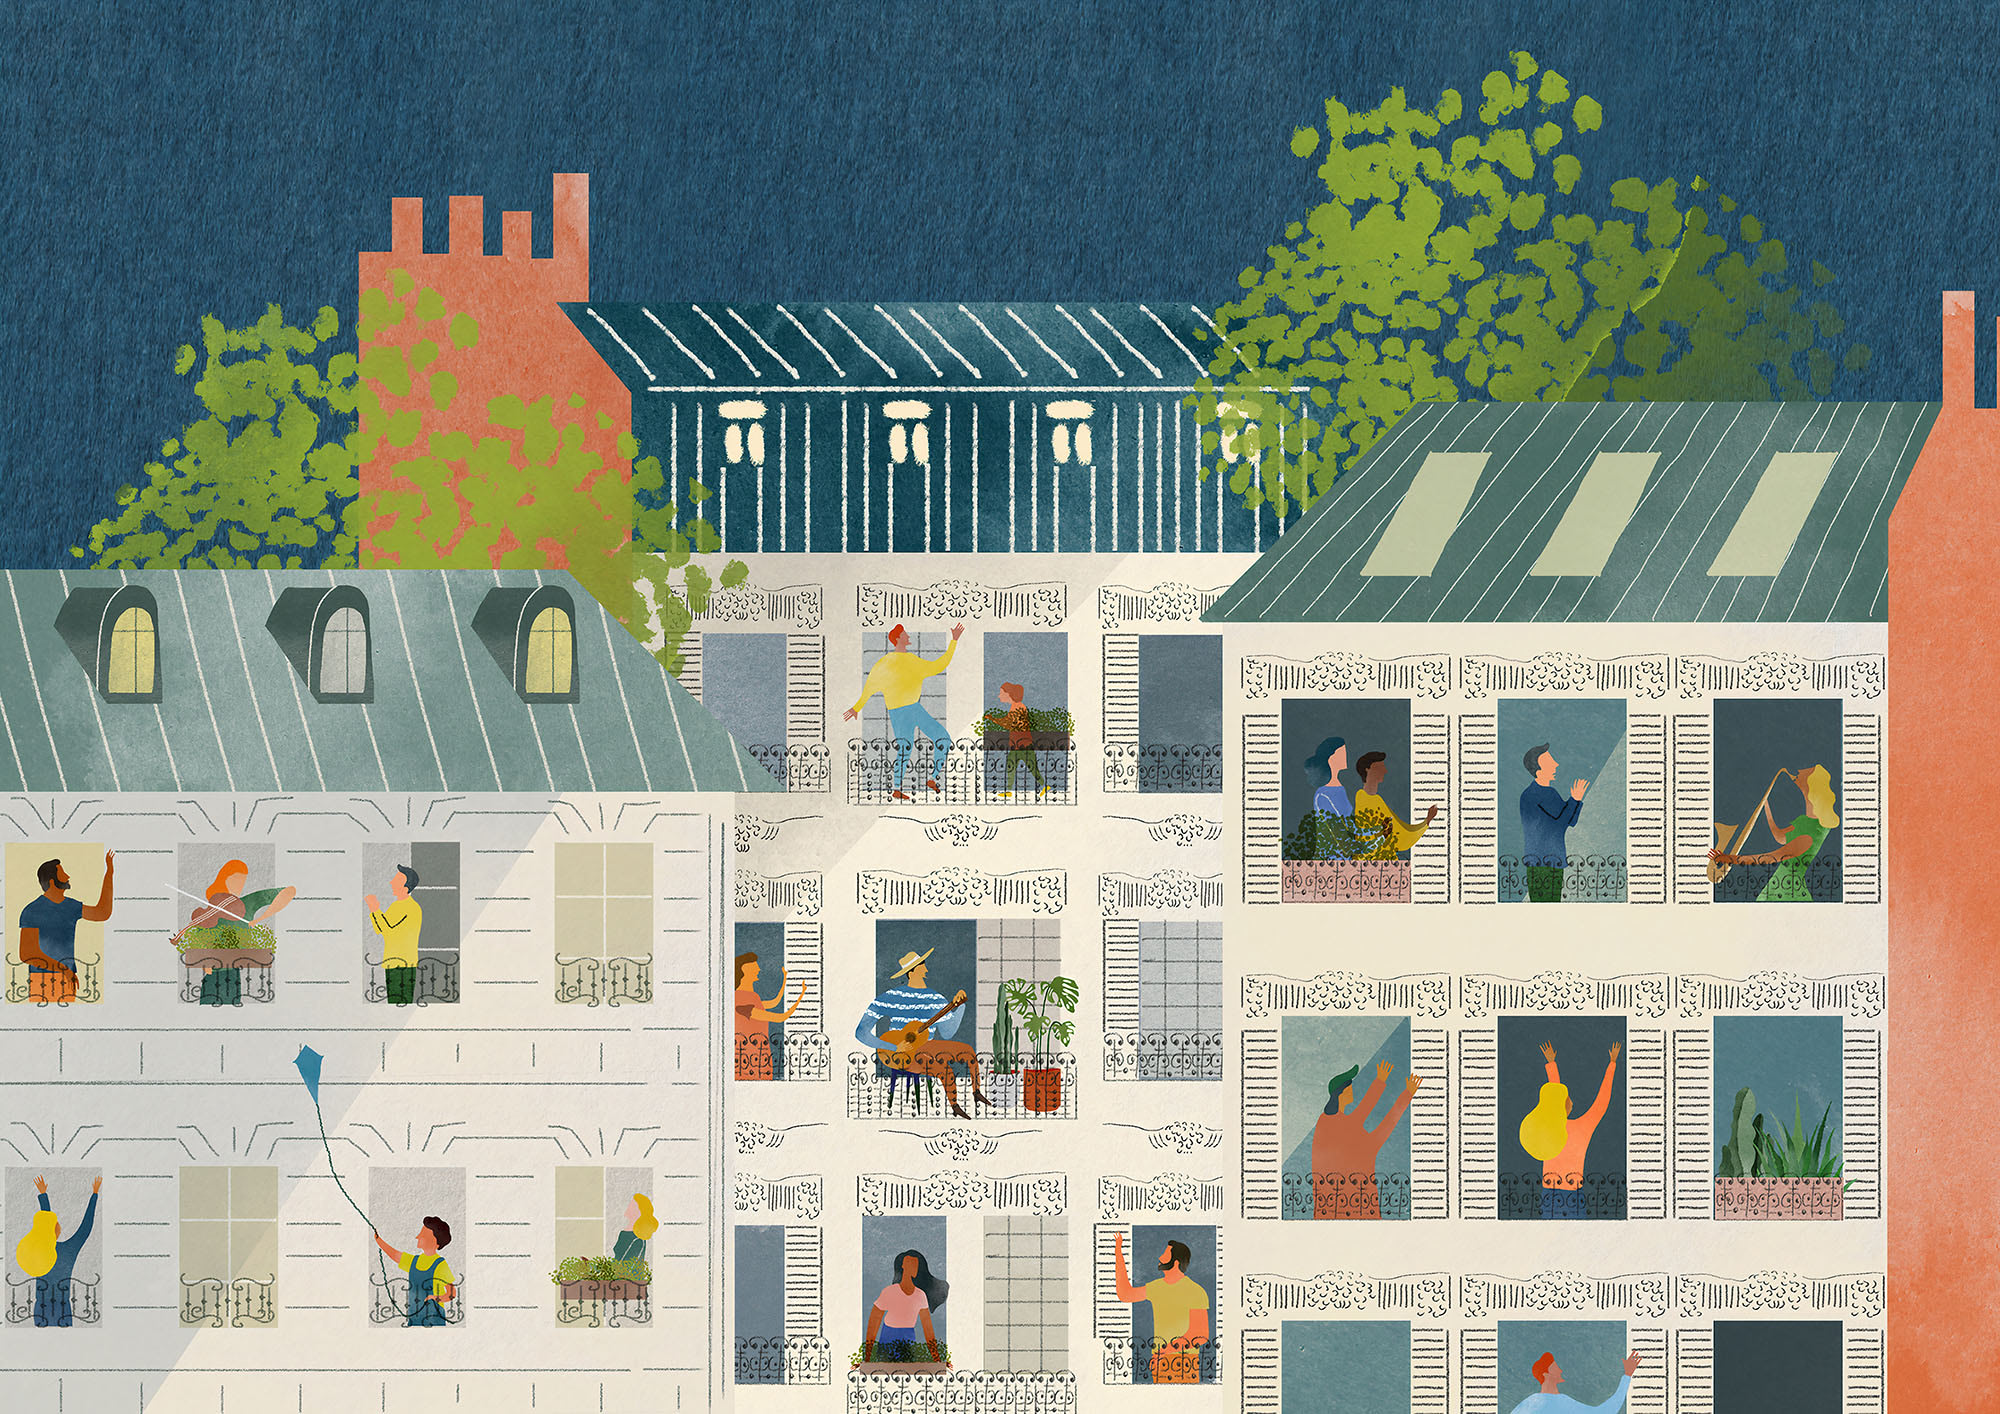 Illustration of people standing at balconies and interacting with each other through music and communication